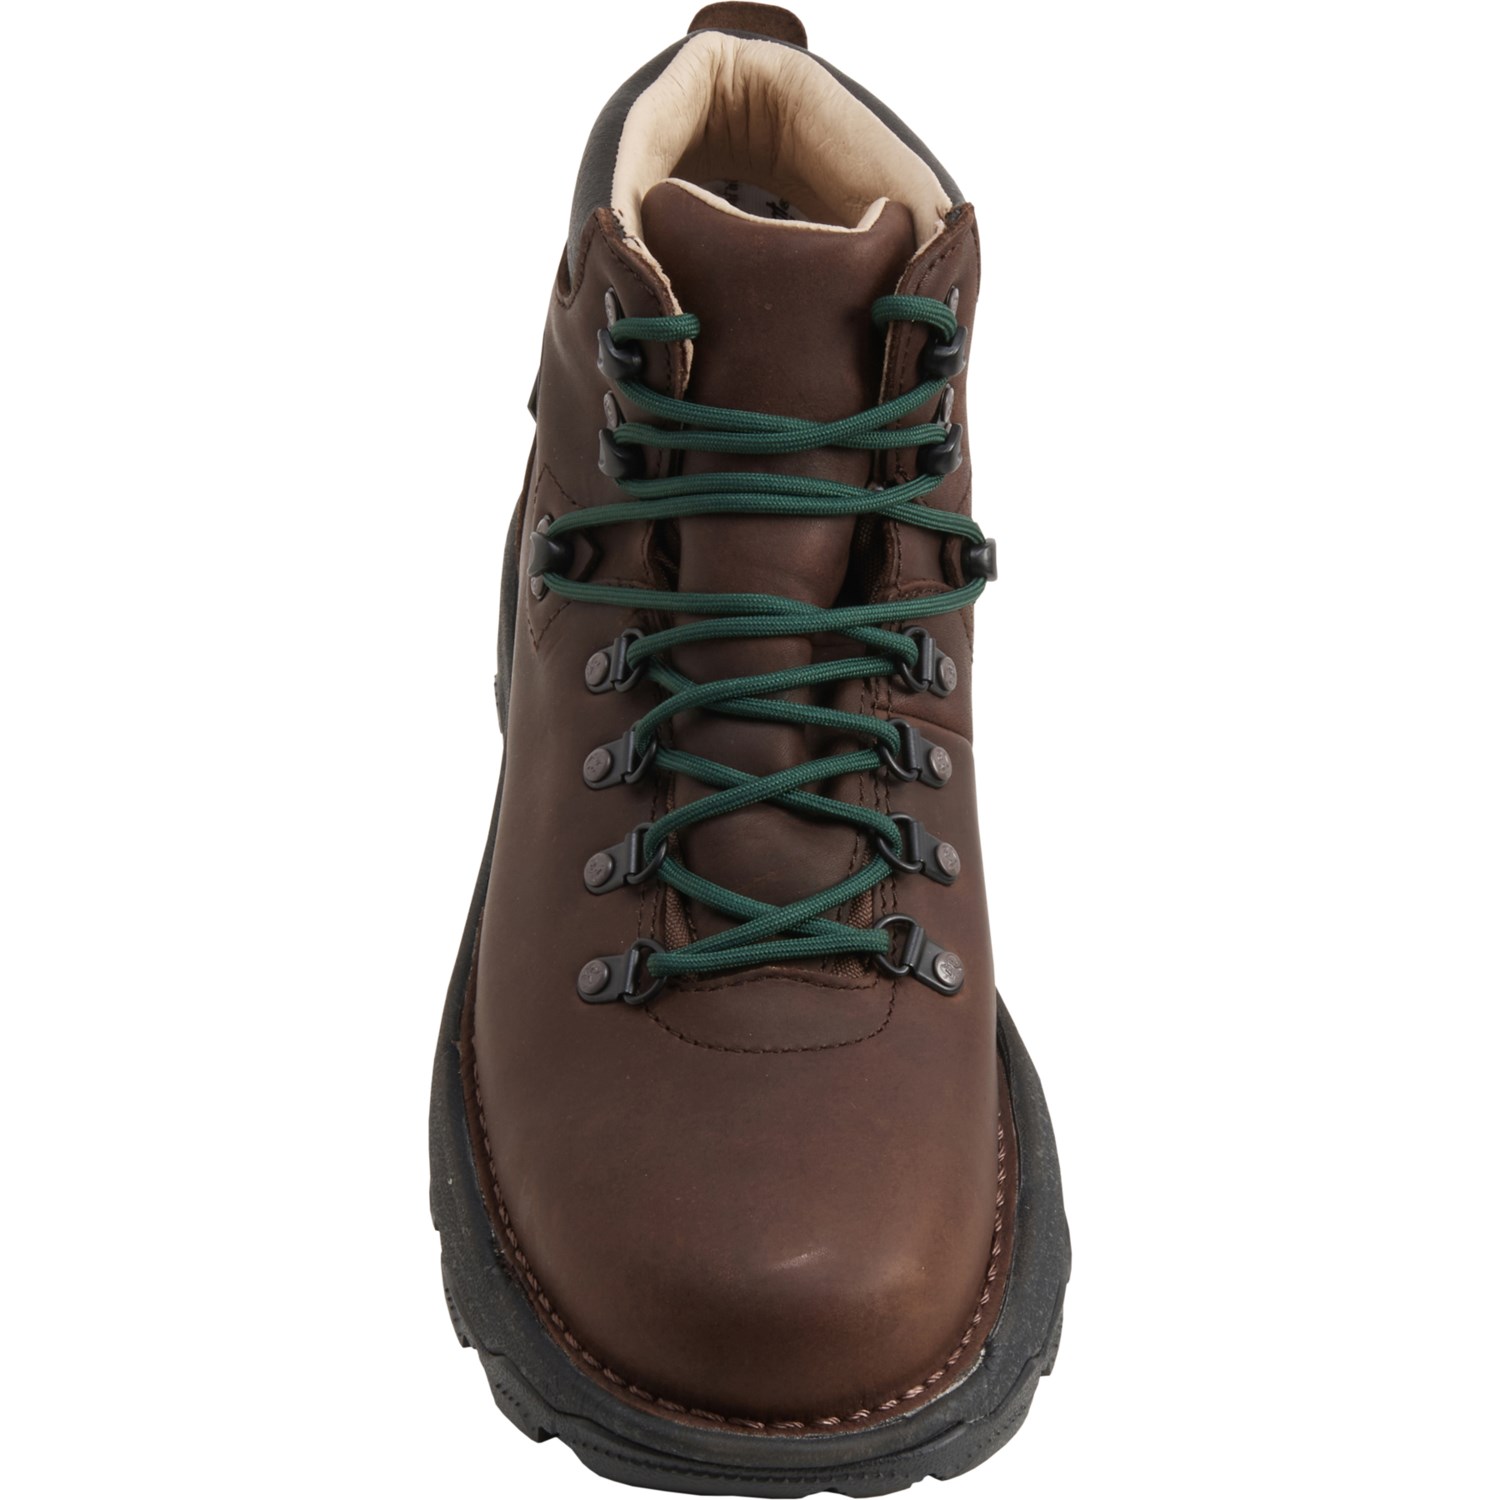 Rocky Rampage Hiking Boots (For Men) - Save 35%